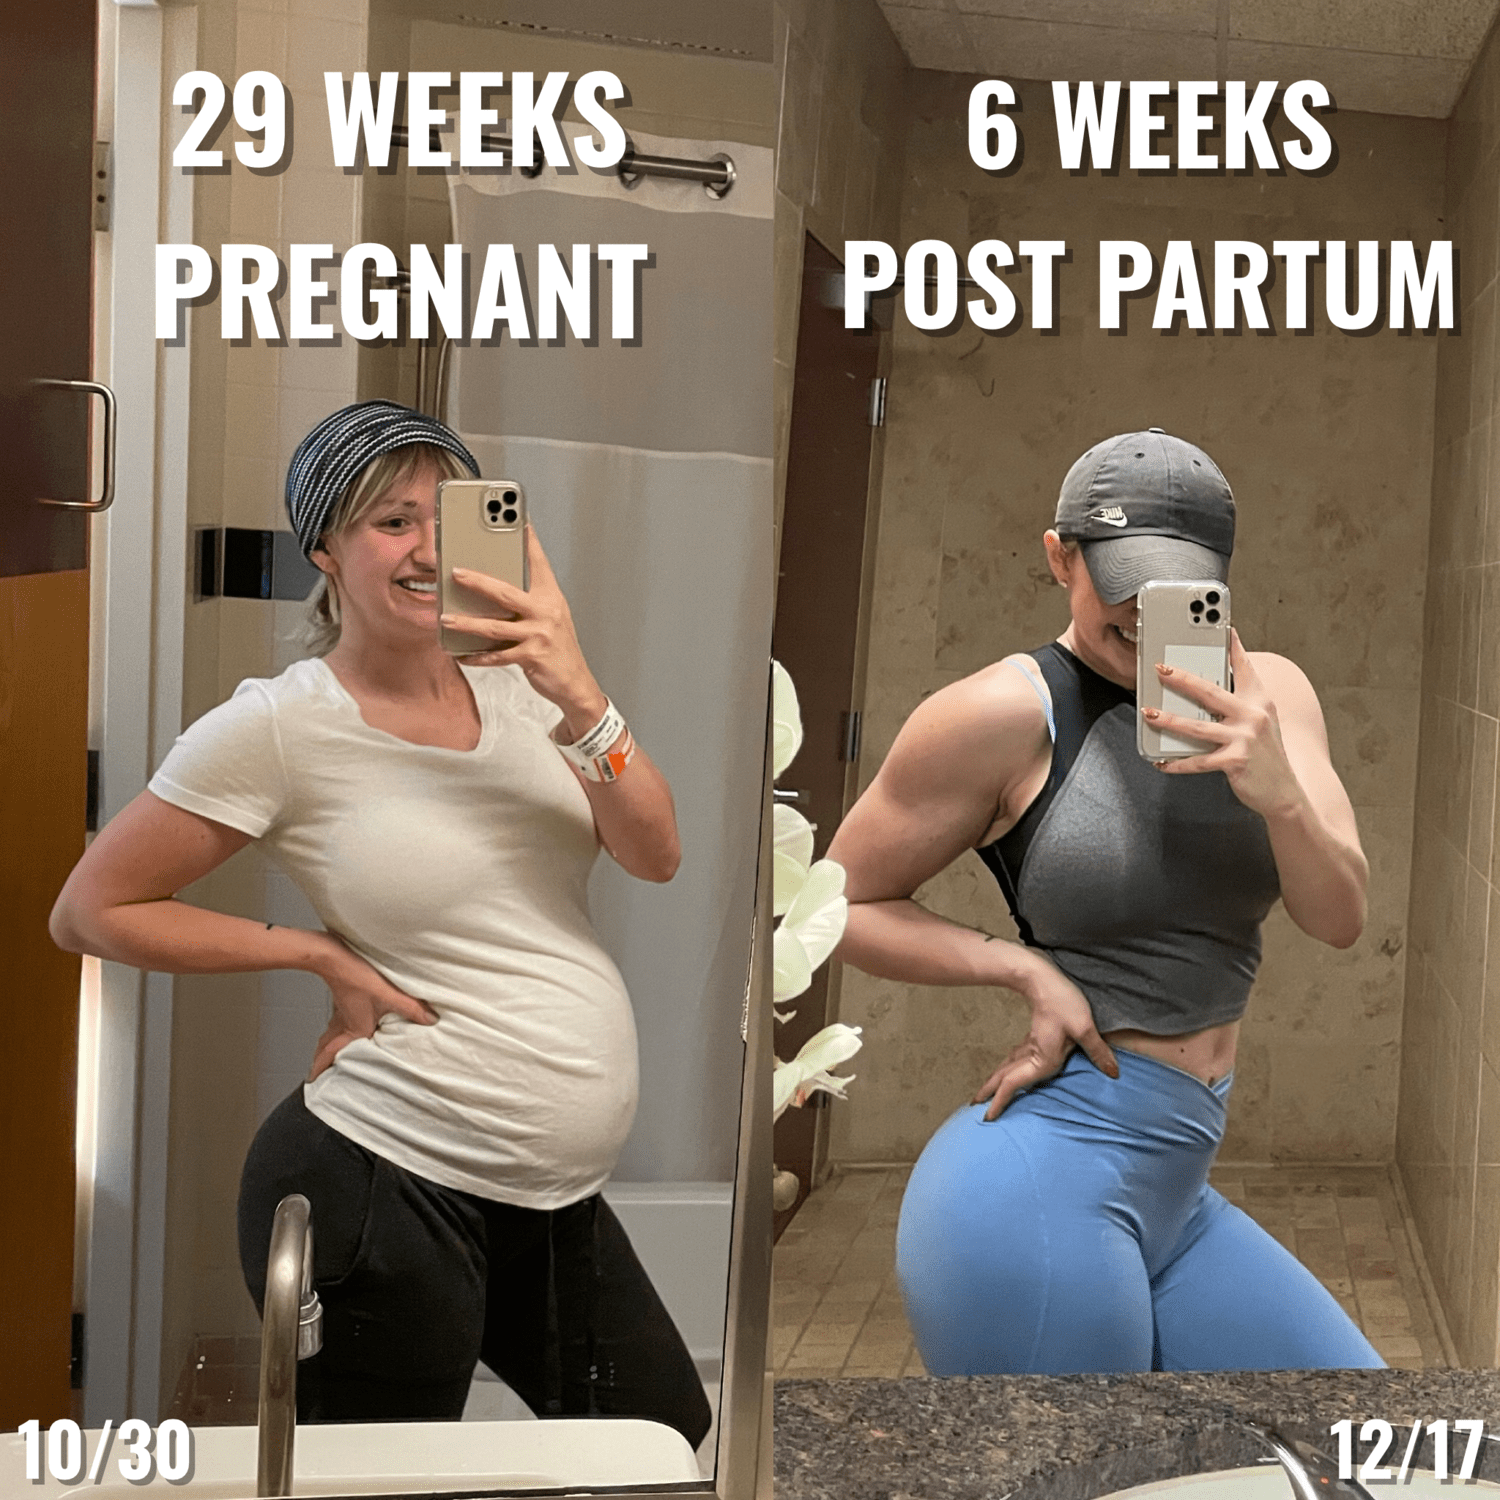 Comparison image of Anna Quinn 29 weeks pregnant and 6 weeks postpartum